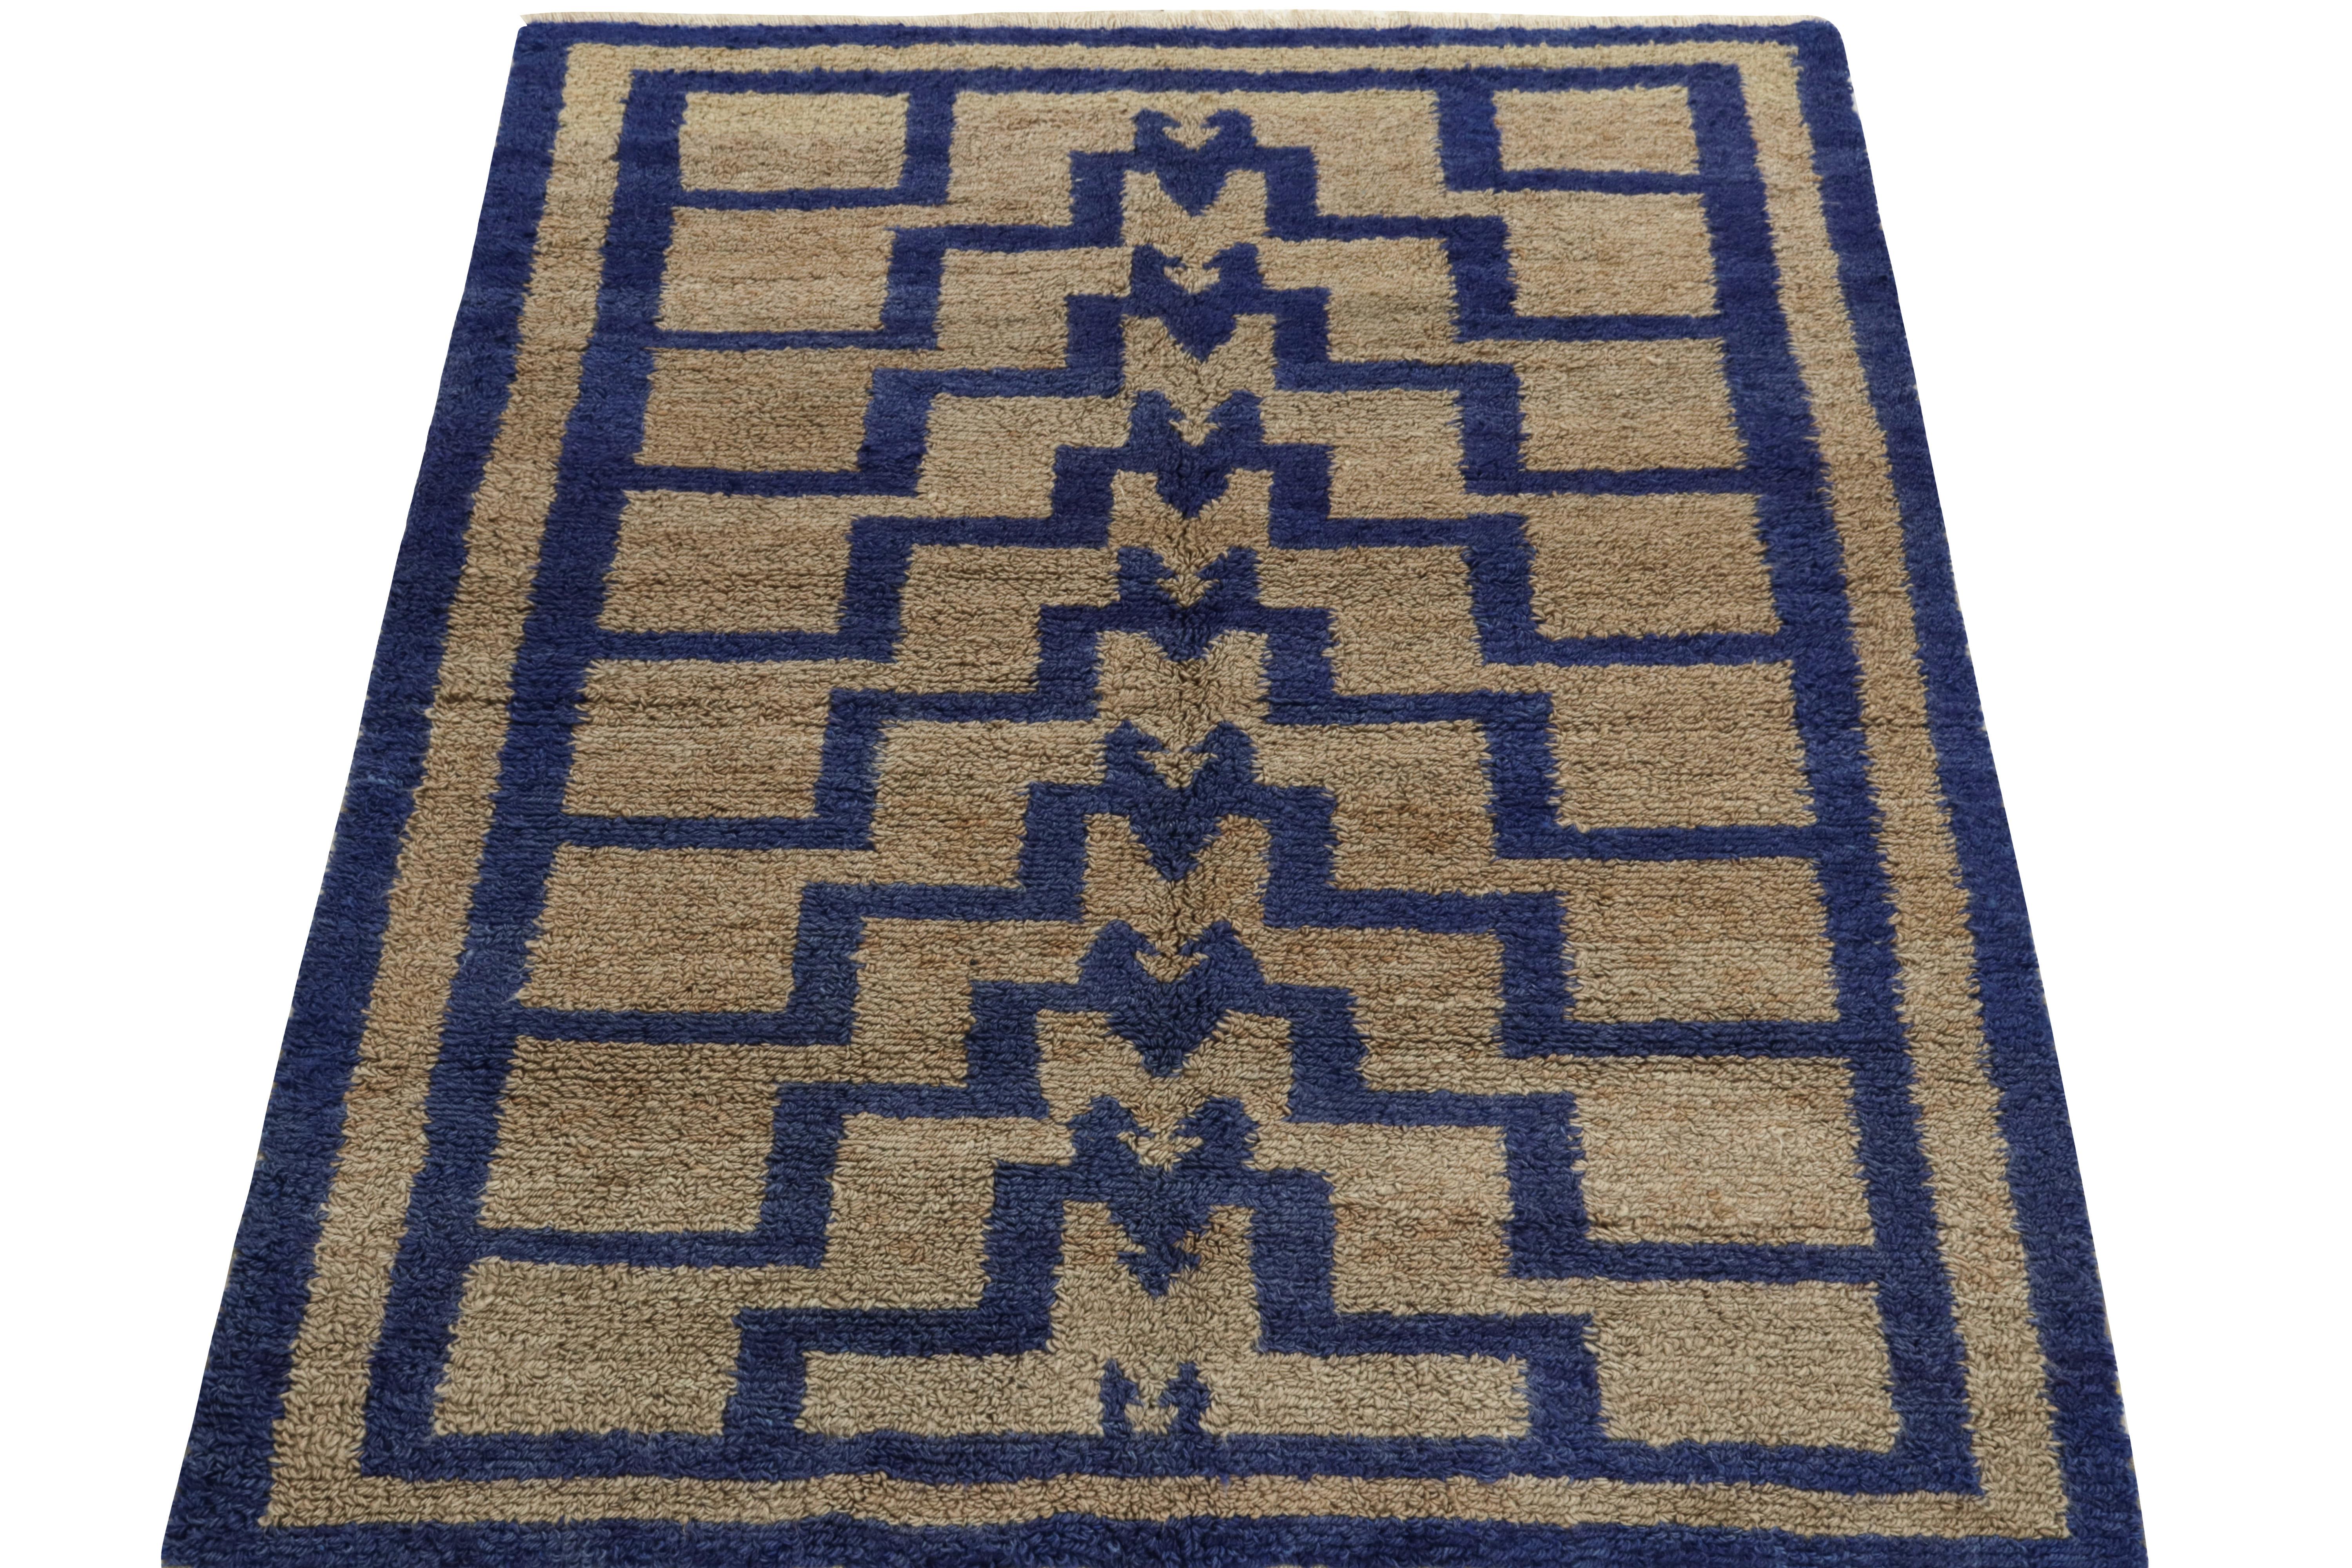 Hand-knotted in wool from Turkey circa 1950-1960, a vintage 4x6 Tulu rug from our antique & vintage collection featuring a symmetric geometric pattern. The complementary blue and beige-brown colorplay brings out textural richness to the luscious